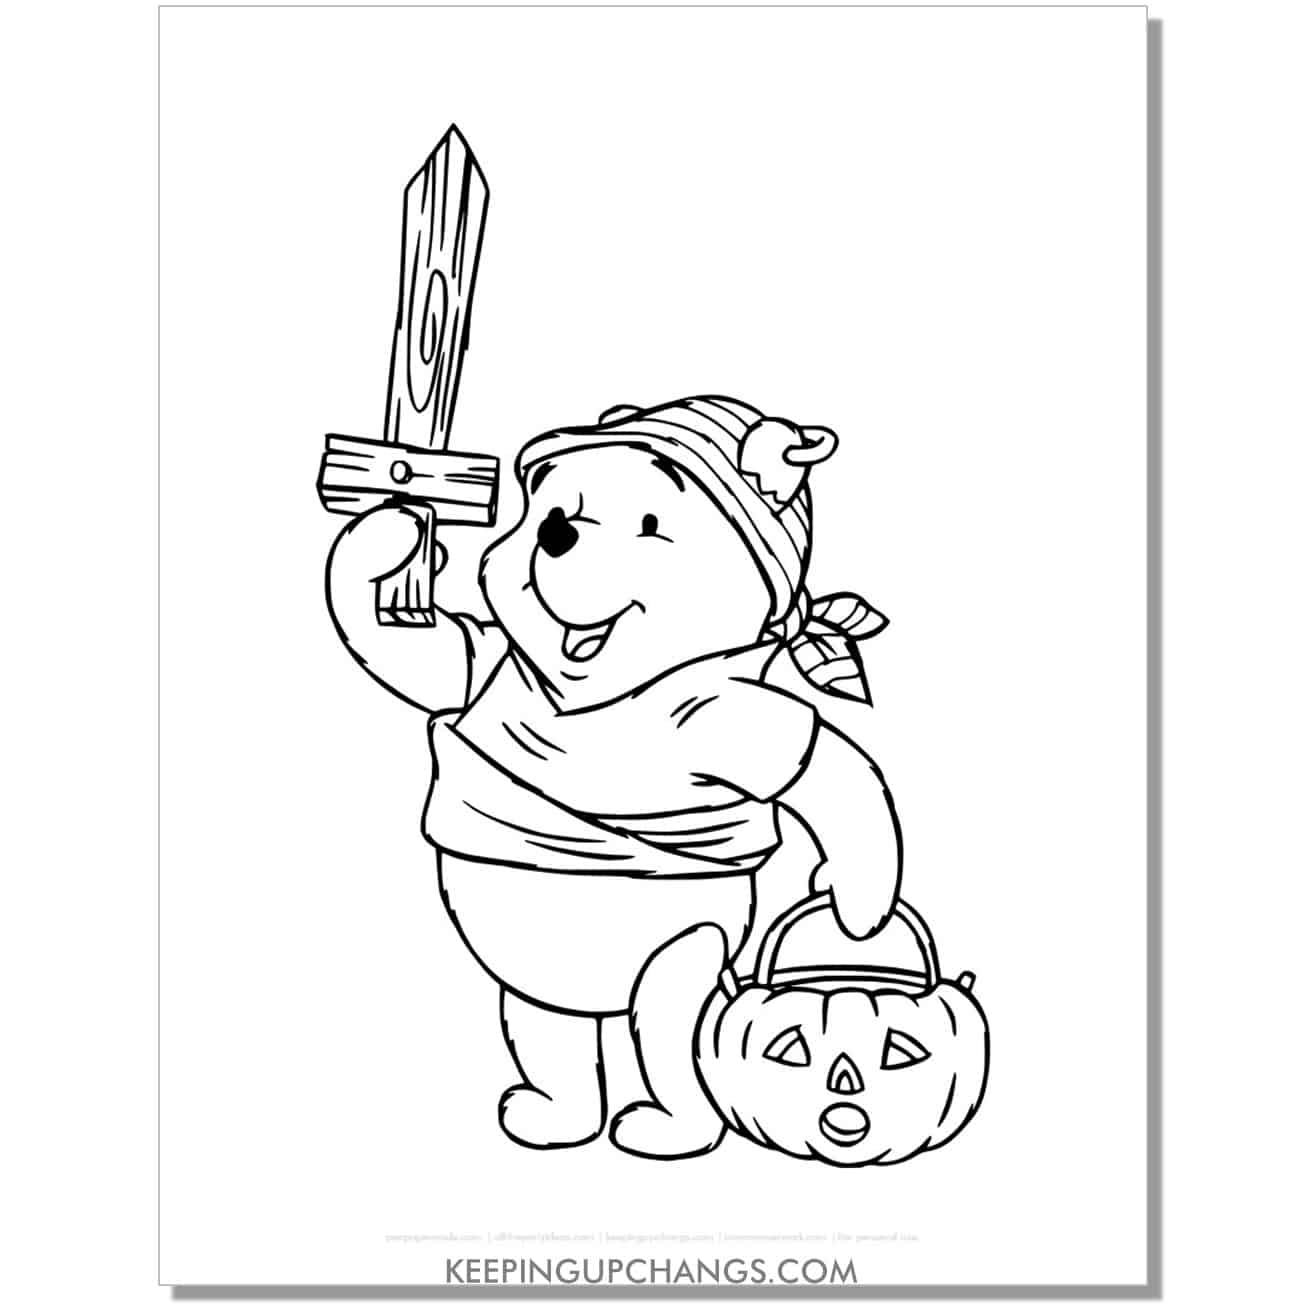 winnie the pooh halloween pirate costume coloring page, sheet.